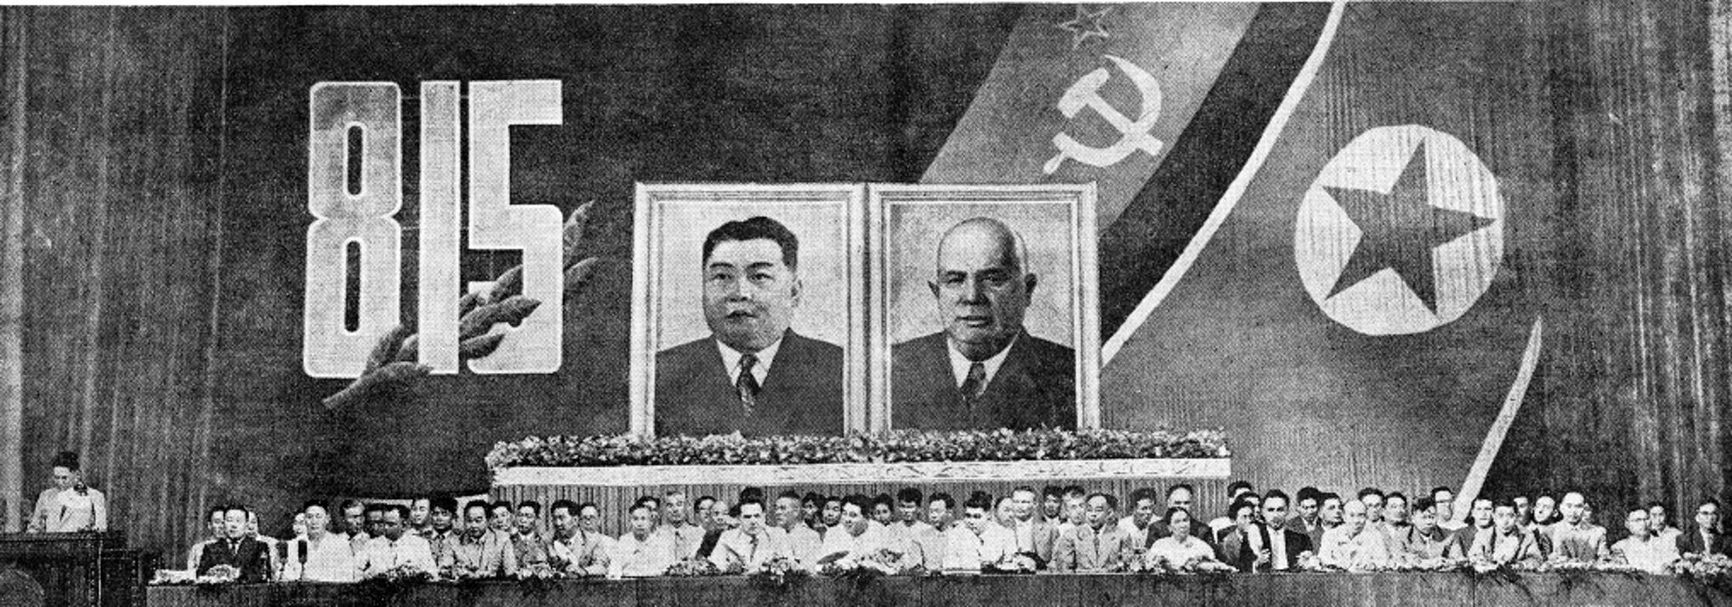 Commemoration of the 16th anniversary of Japan's surrender, Aug. 15, 1961. The podium displays portraits of Kim Il Sung and Soviet leader Nikita Khrushchev. In today's North Korea, any photos of the leader or his portrait alongside the “revisionist Khrushchev” are forbidden